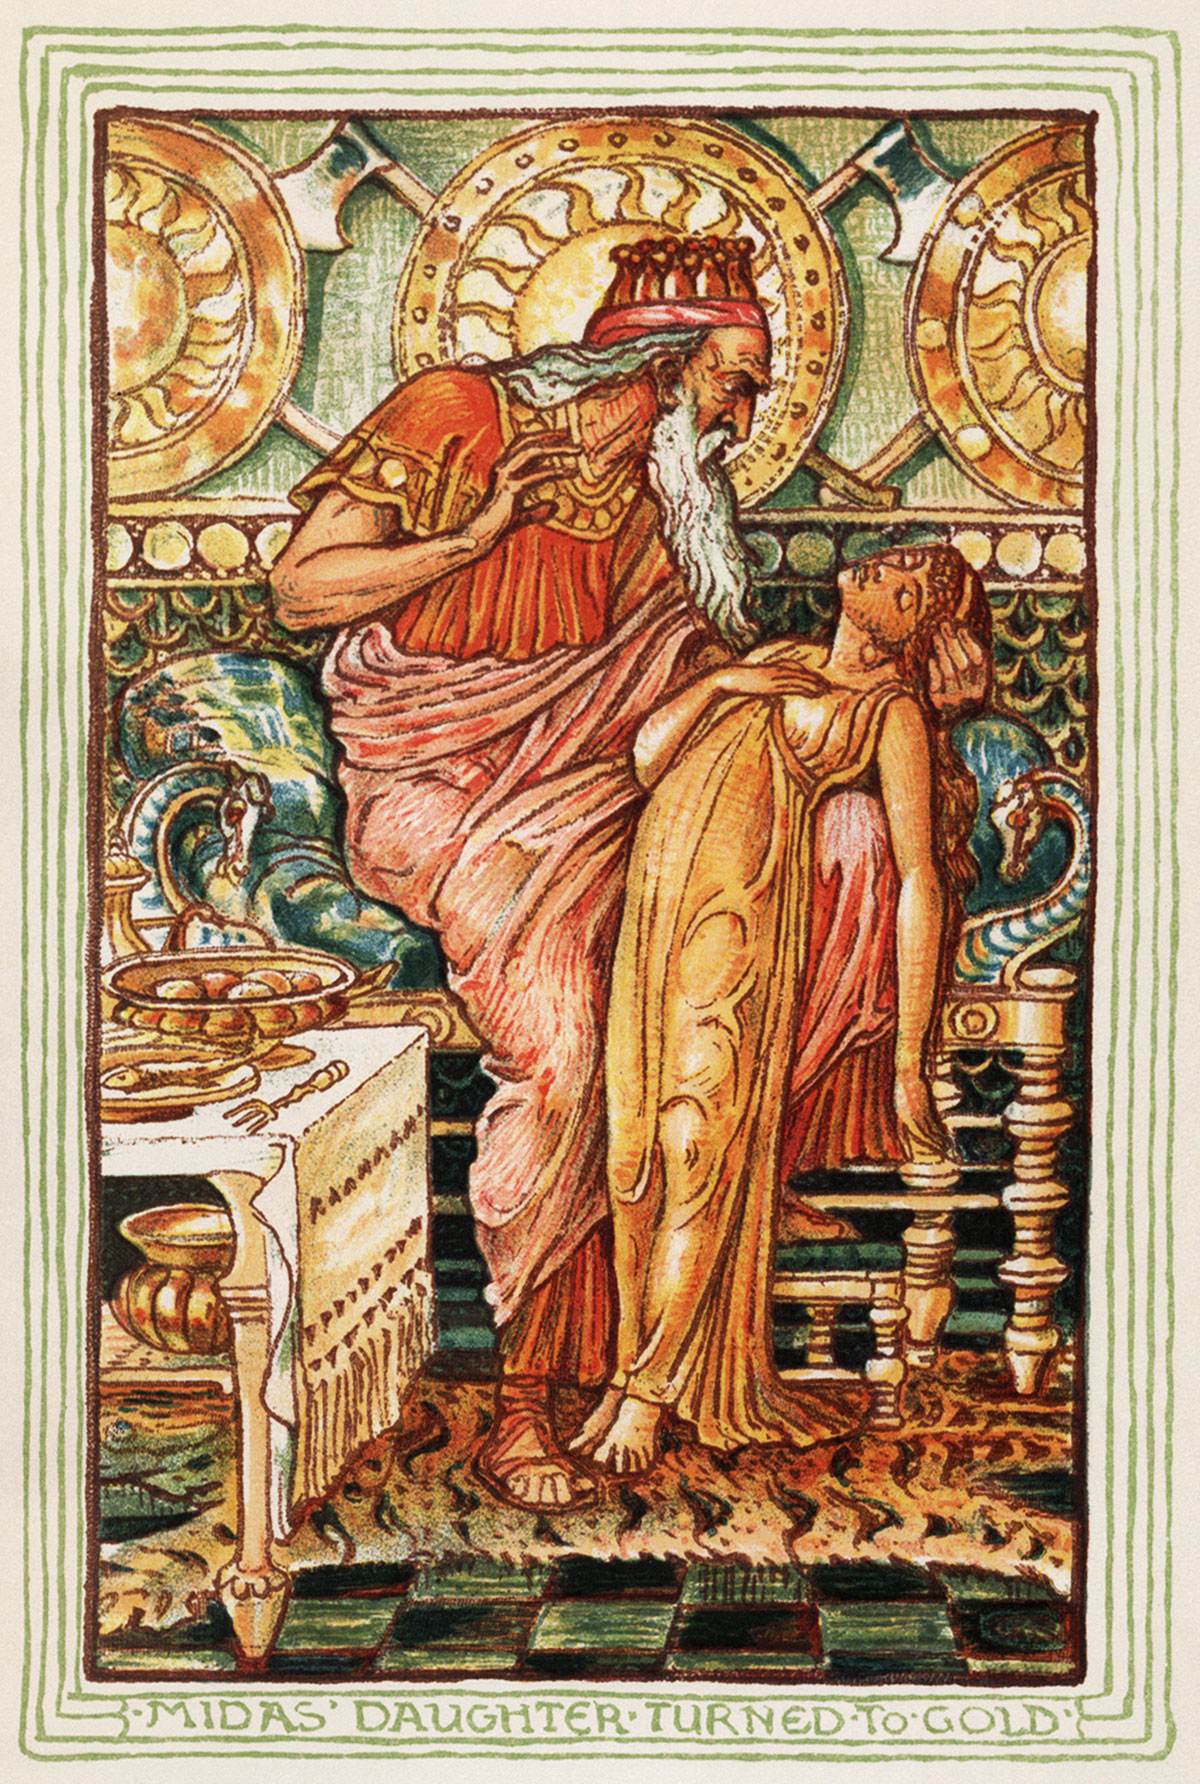 King Midas touch turns anything into gold. In this illustration even his daughter. Illustration by Walter Crane (1893).